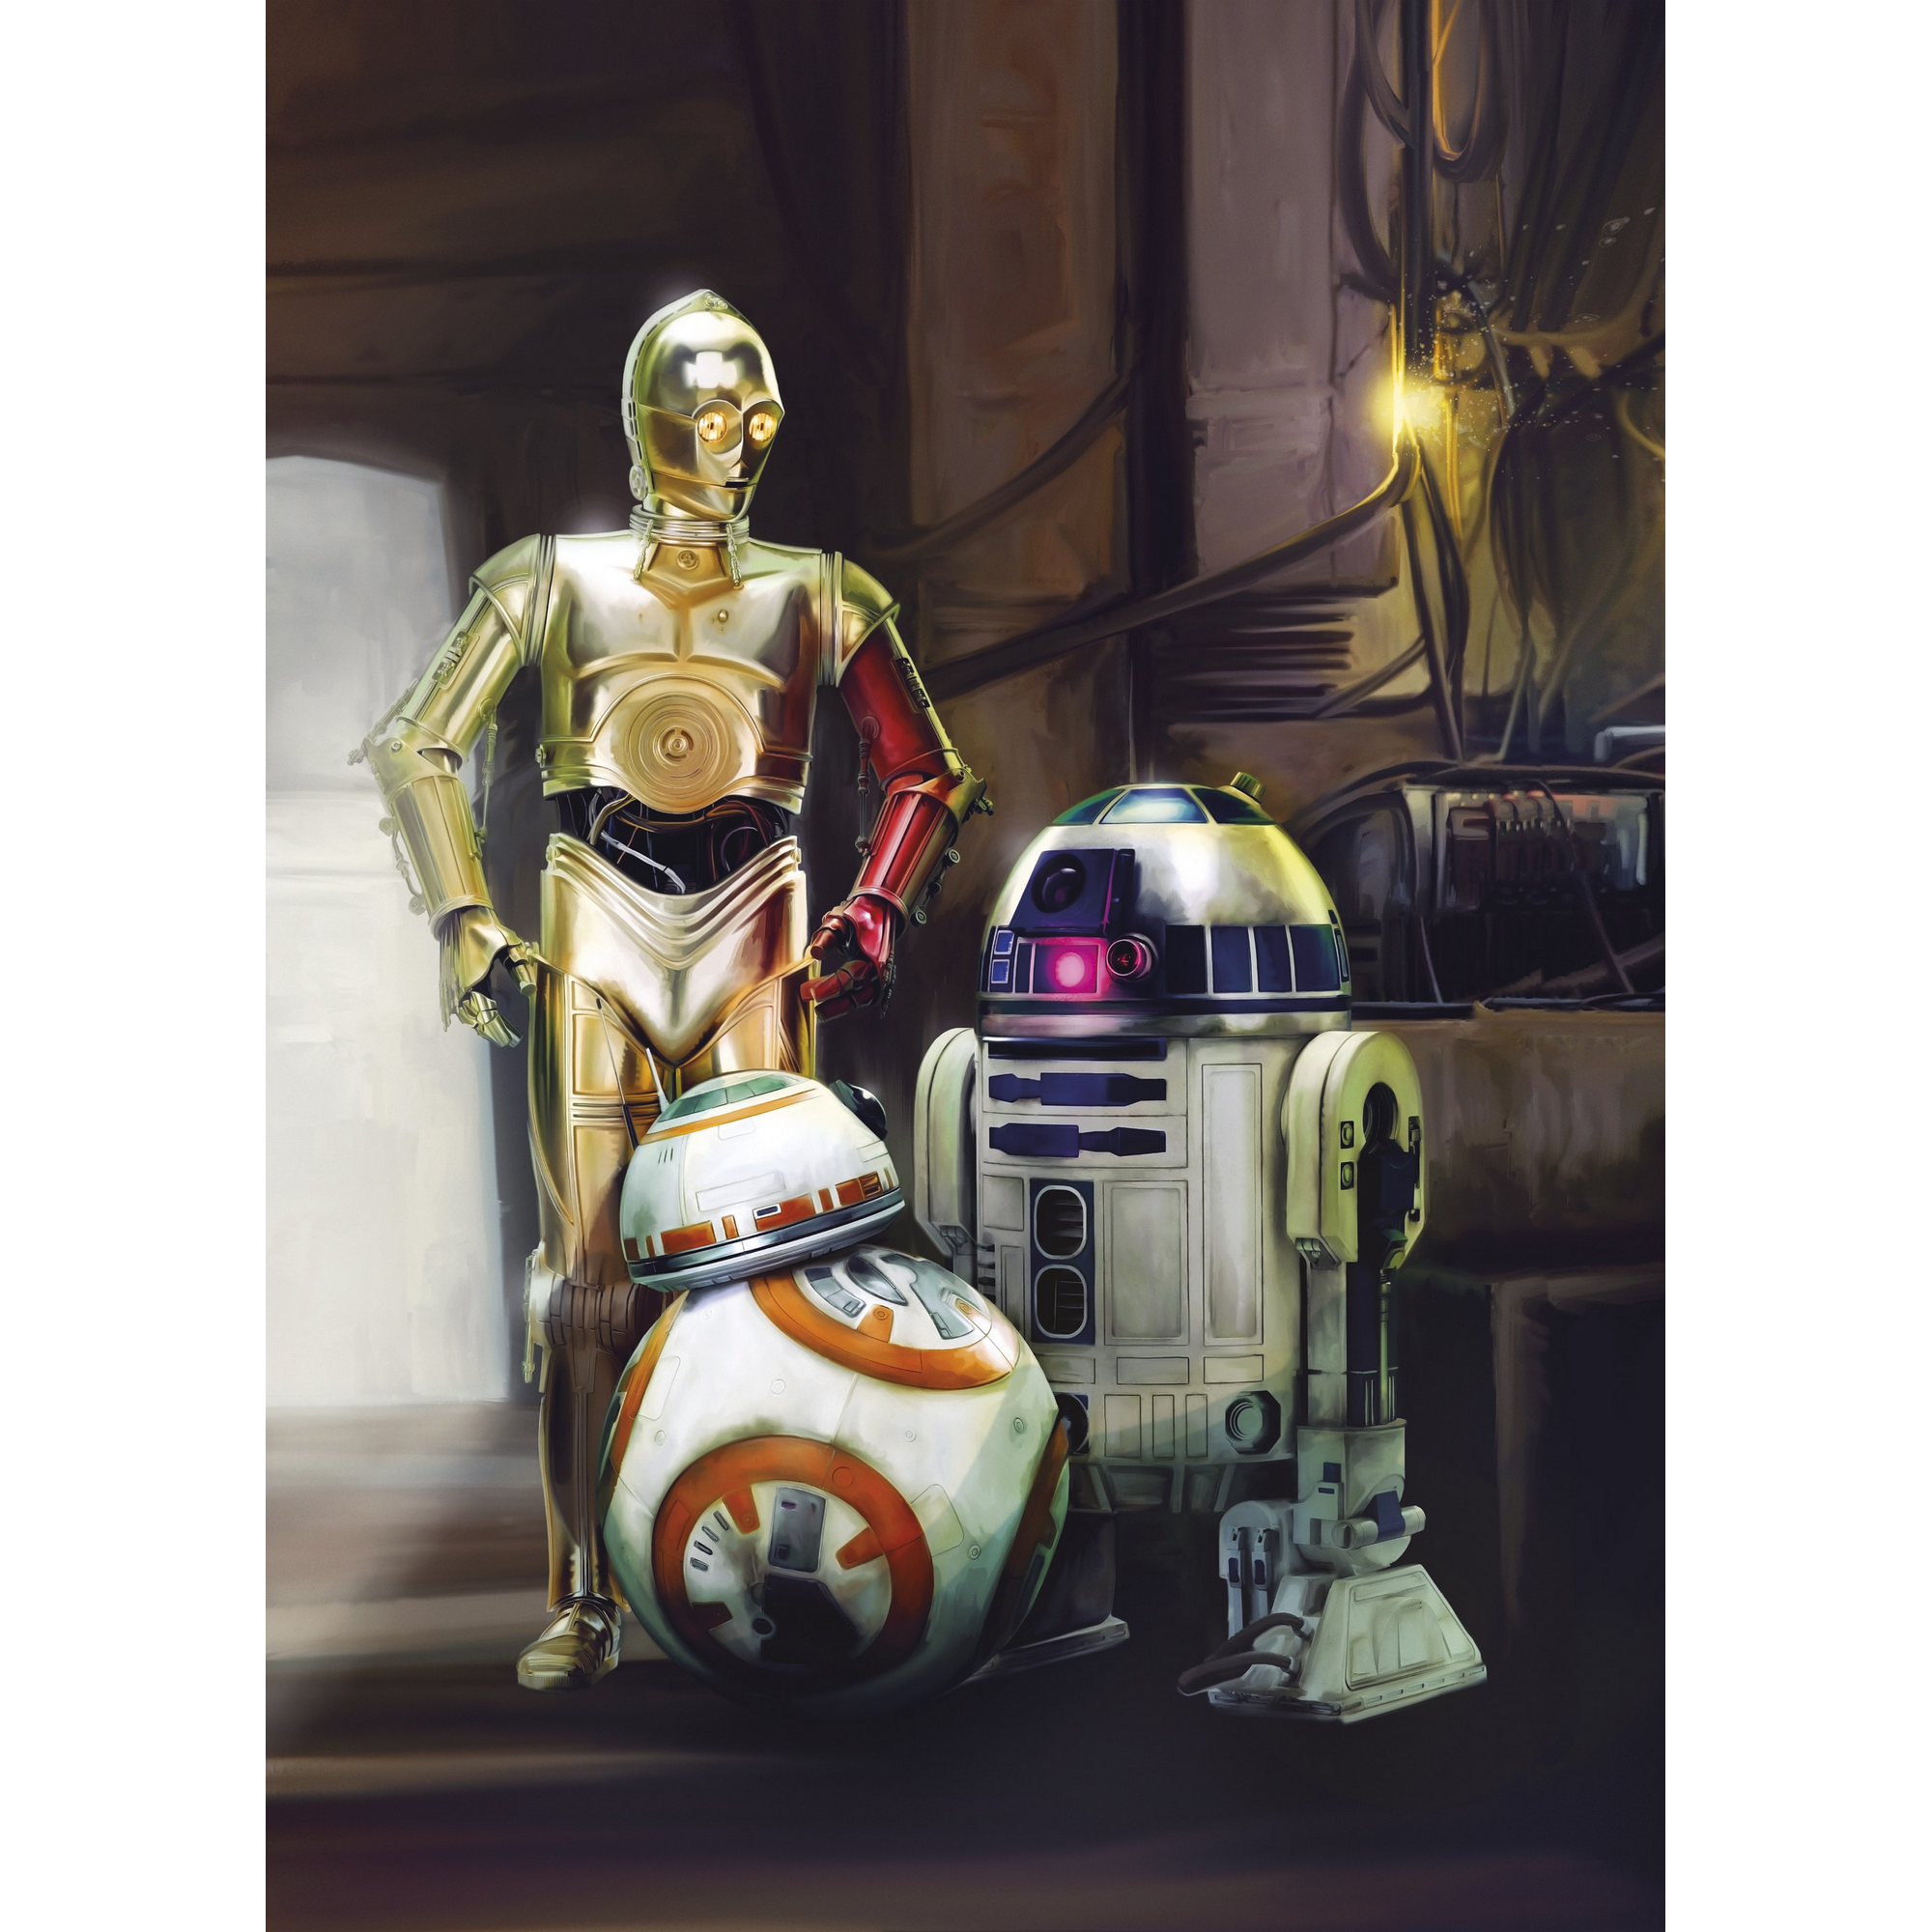 Fototapete 'Star Wars Three Droids' 184 x 254 cm + product picture